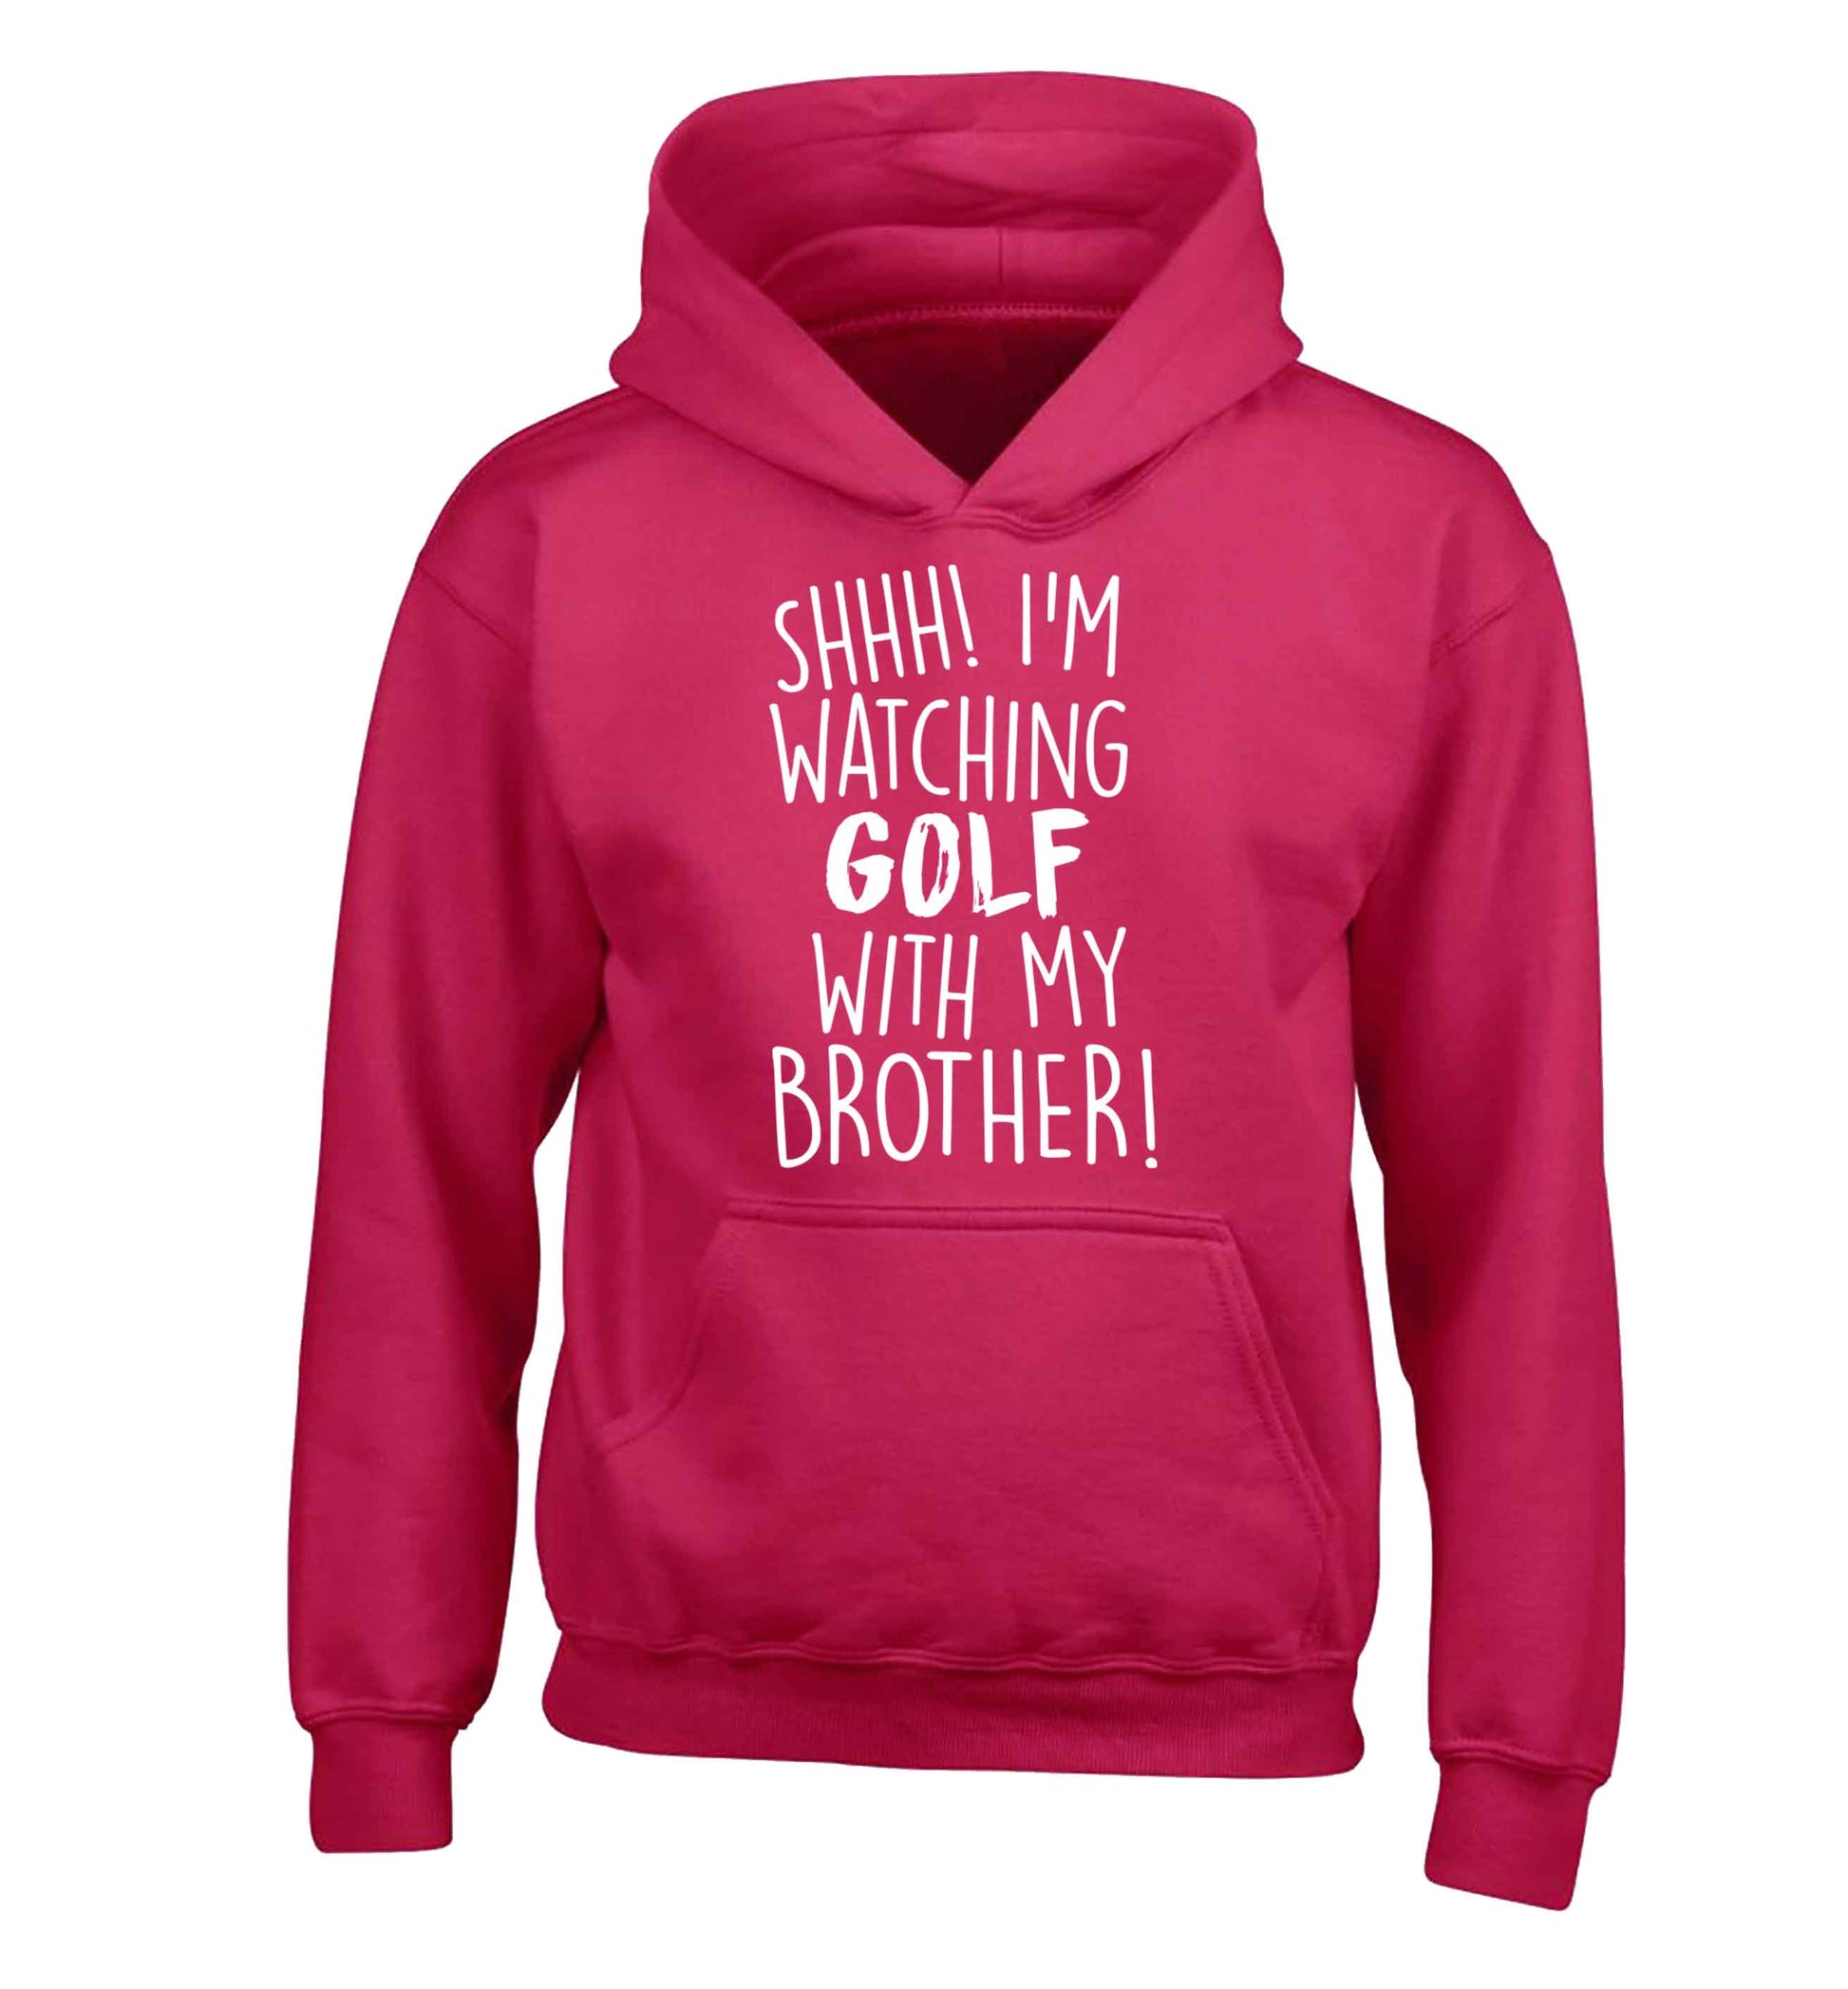 Shh I'm watching golf with my brother children's pink hoodie 12-13 Years